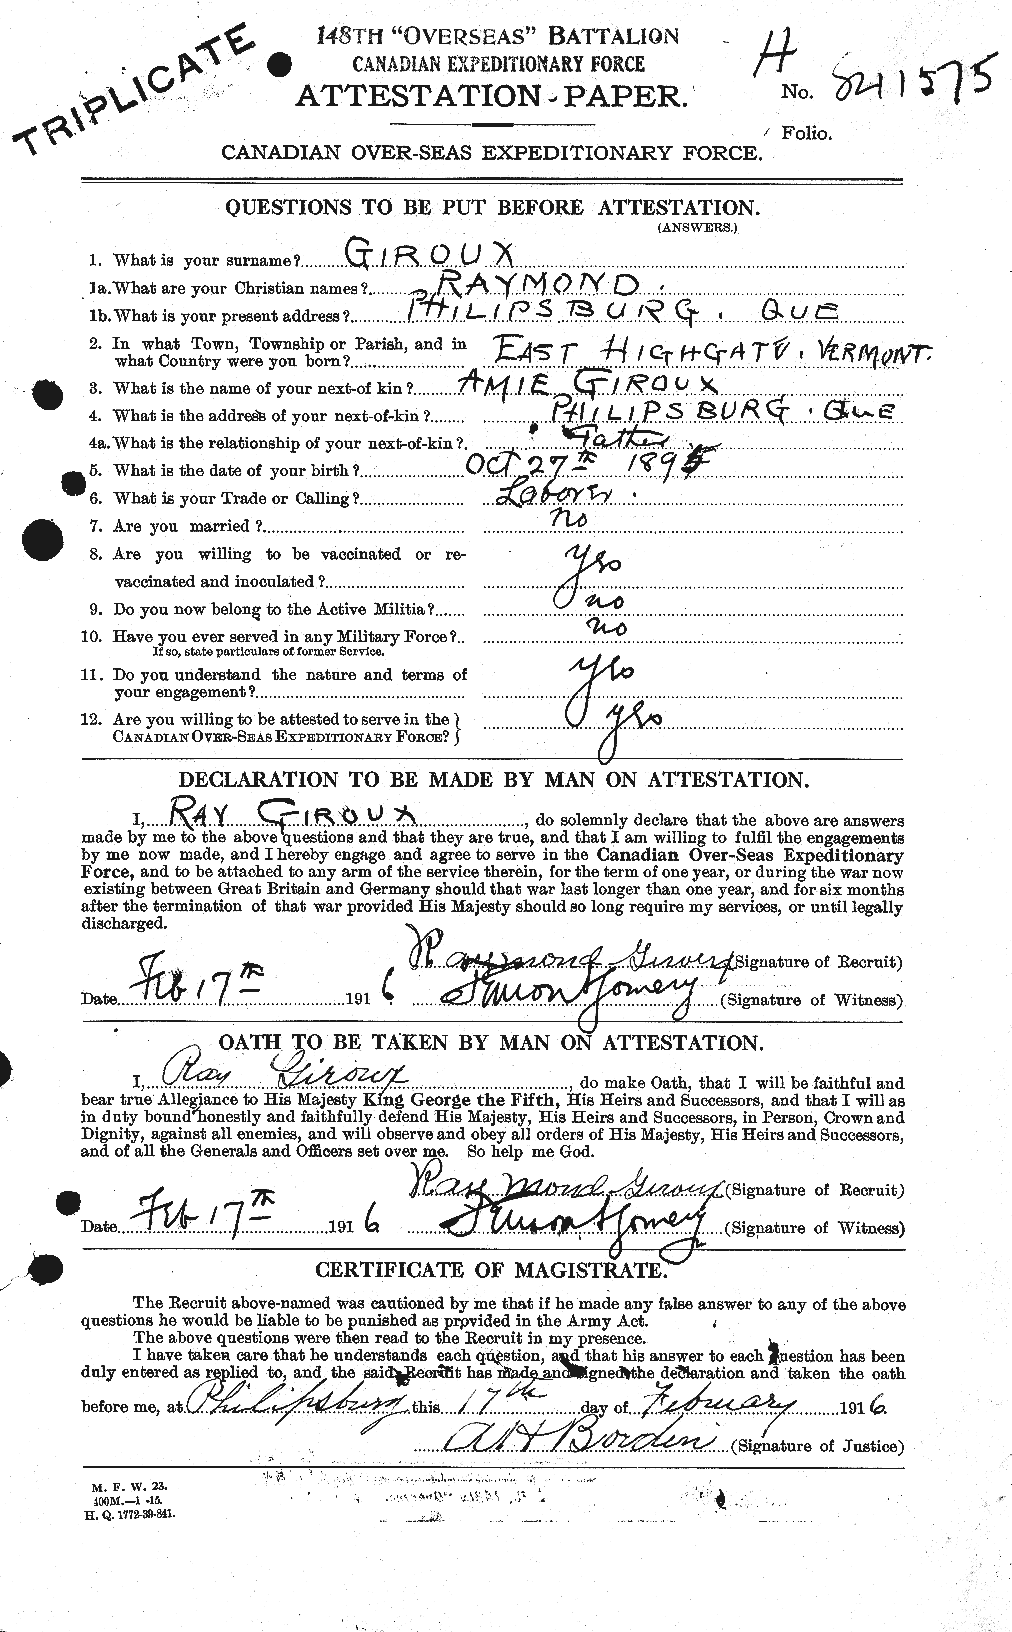 Personnel Records of the First World War - CEF 351286a